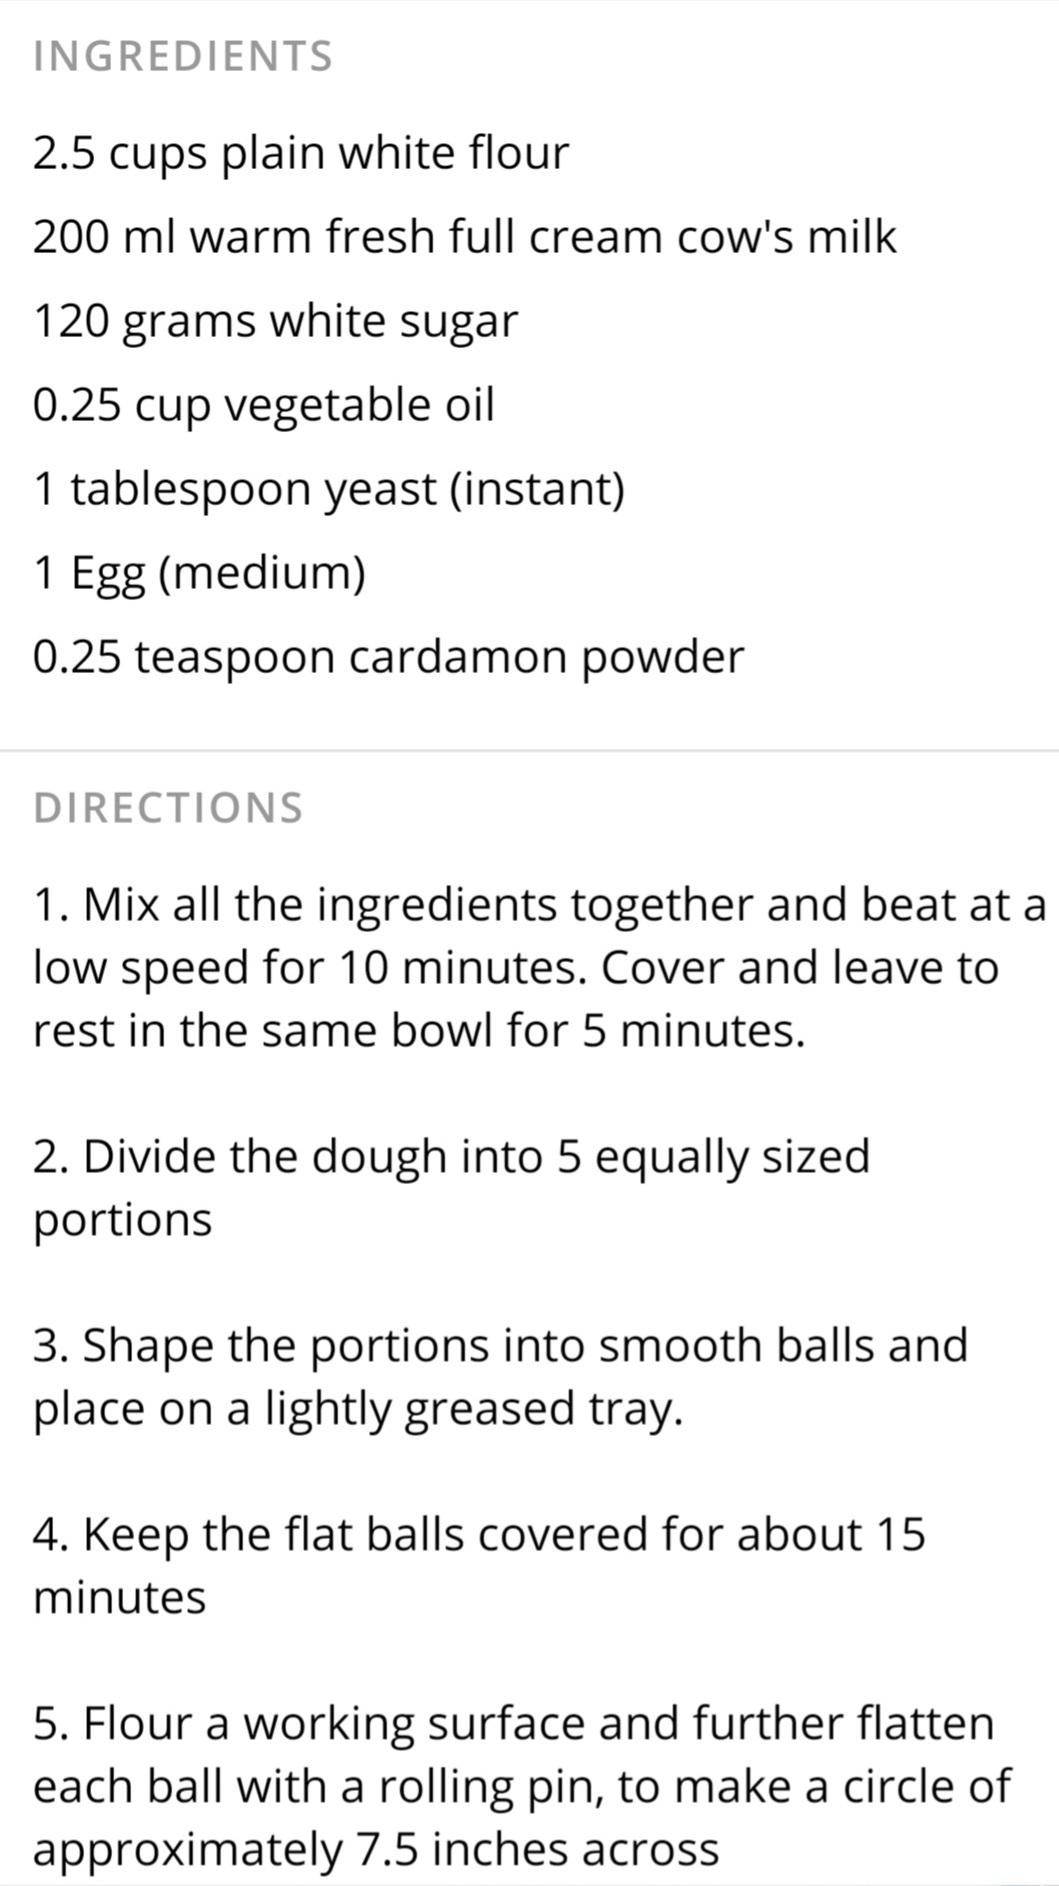 Mandaazi ingredients and directions